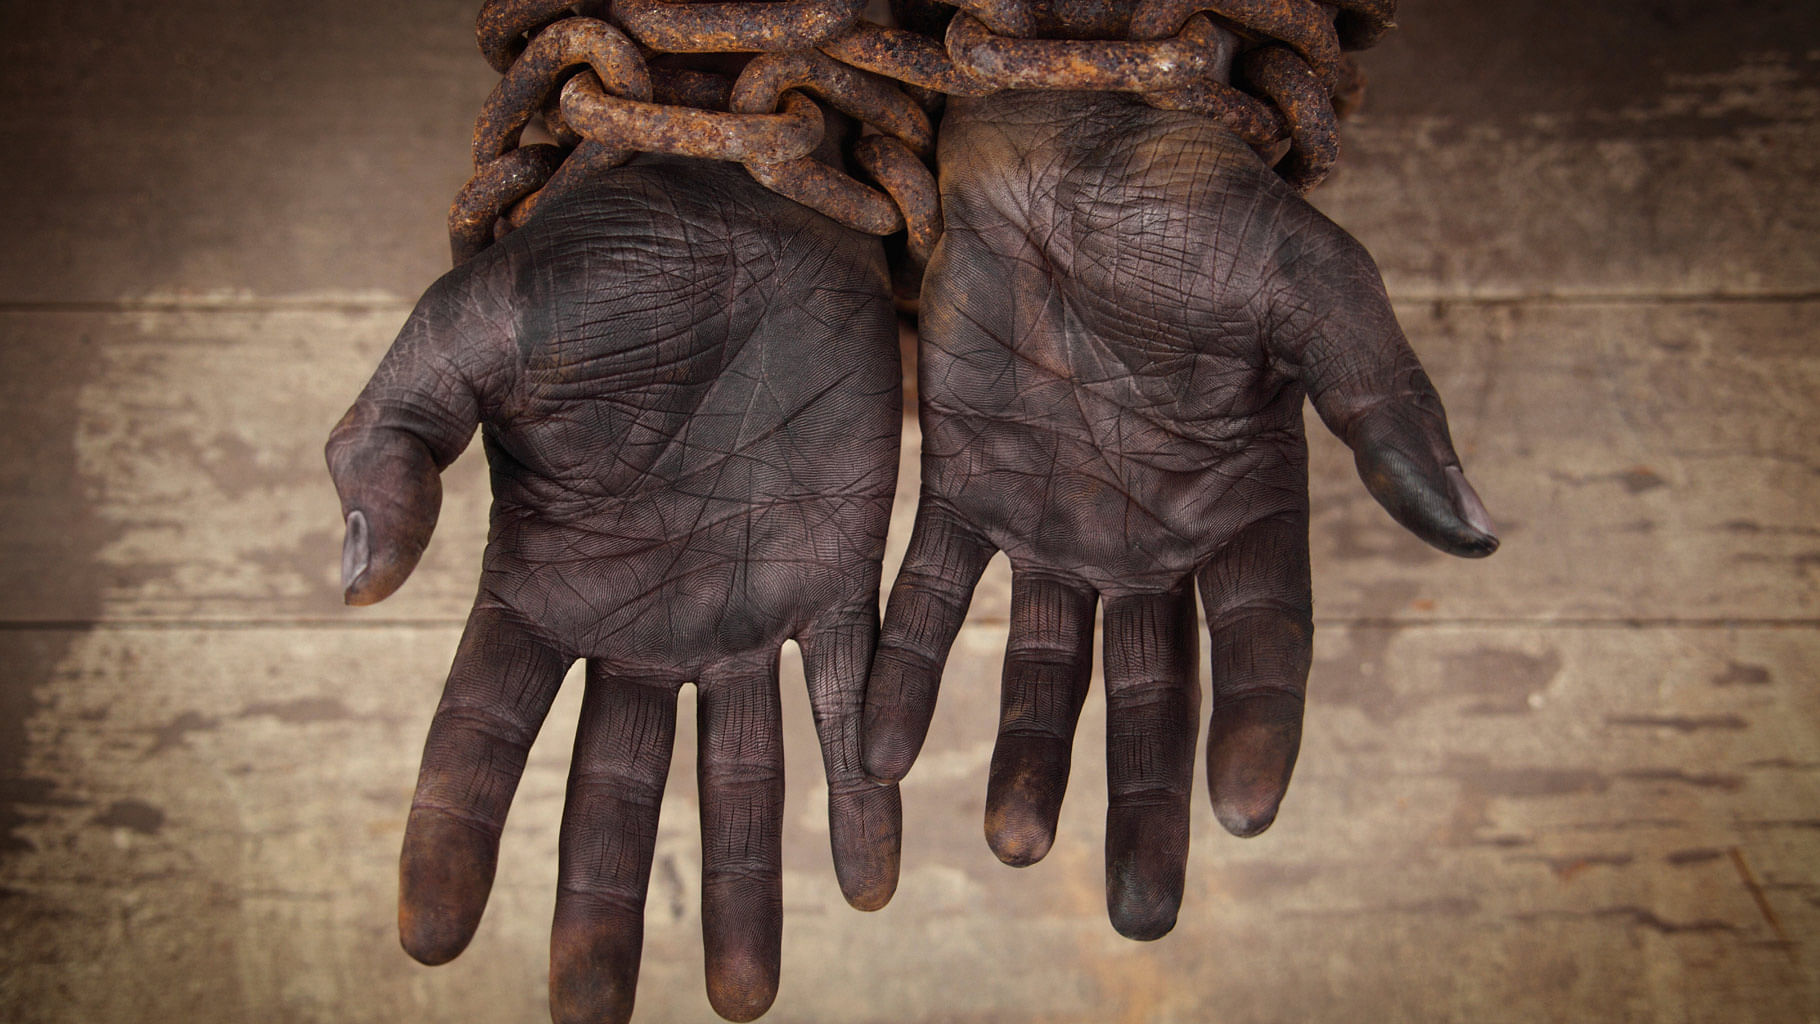 On an average, 51 out of 100 people are vulnerable to modern-day slavery. Image used for representative purpose. (Photo: iStockphoto)